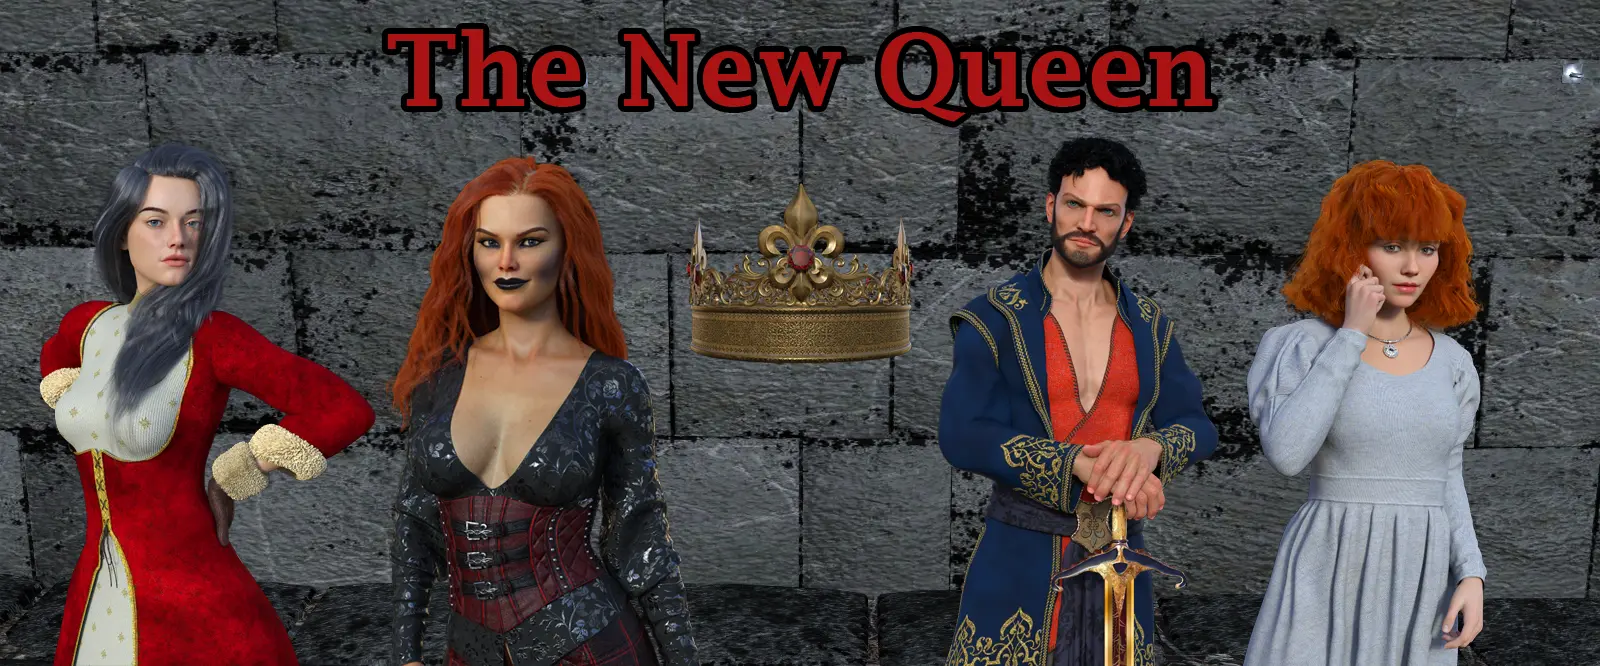 The New Queen main image